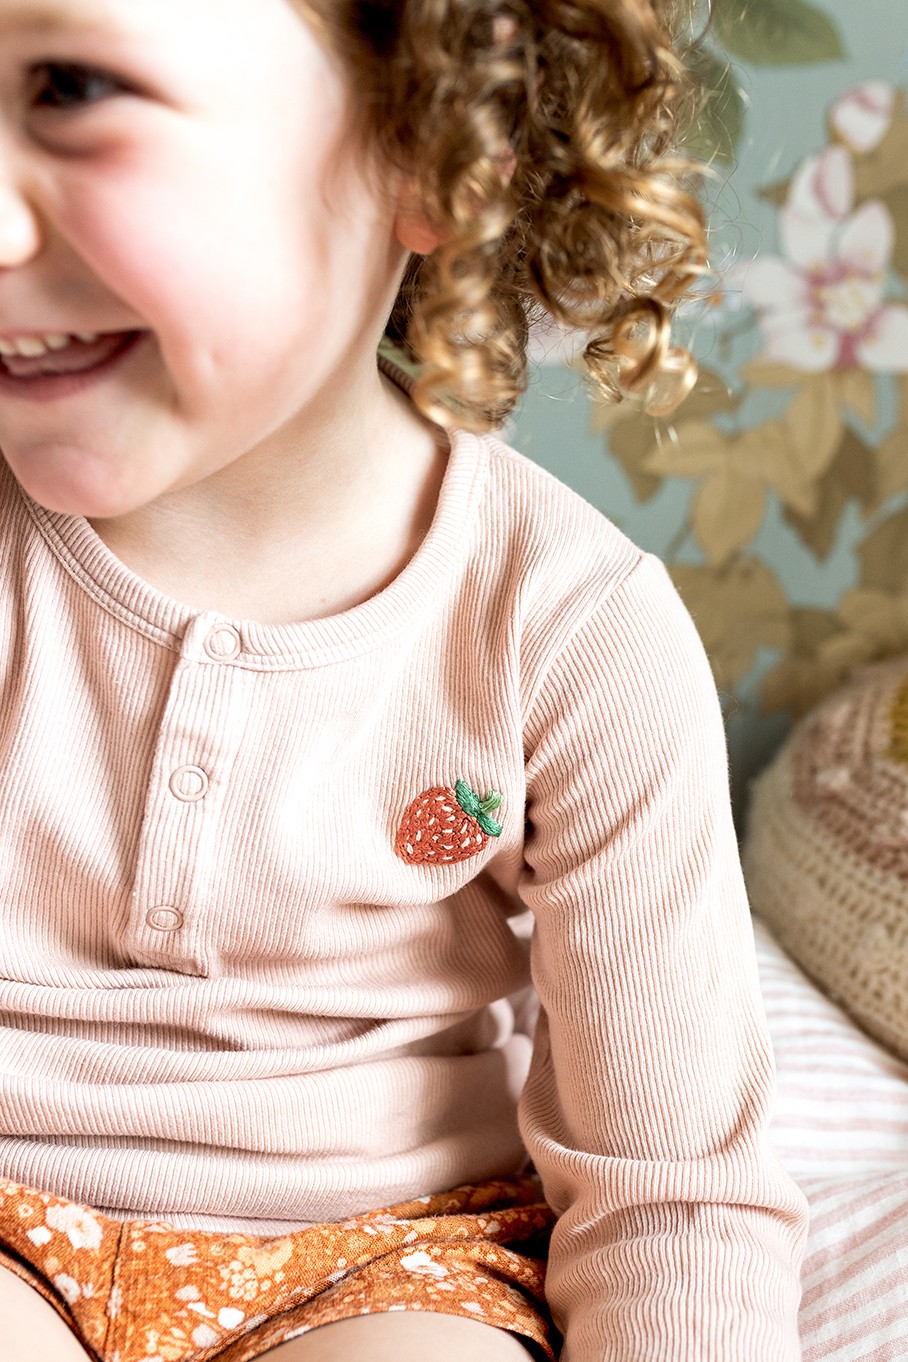 A little girl smiles, wearing a shirt with a strawberry embroidered on it.